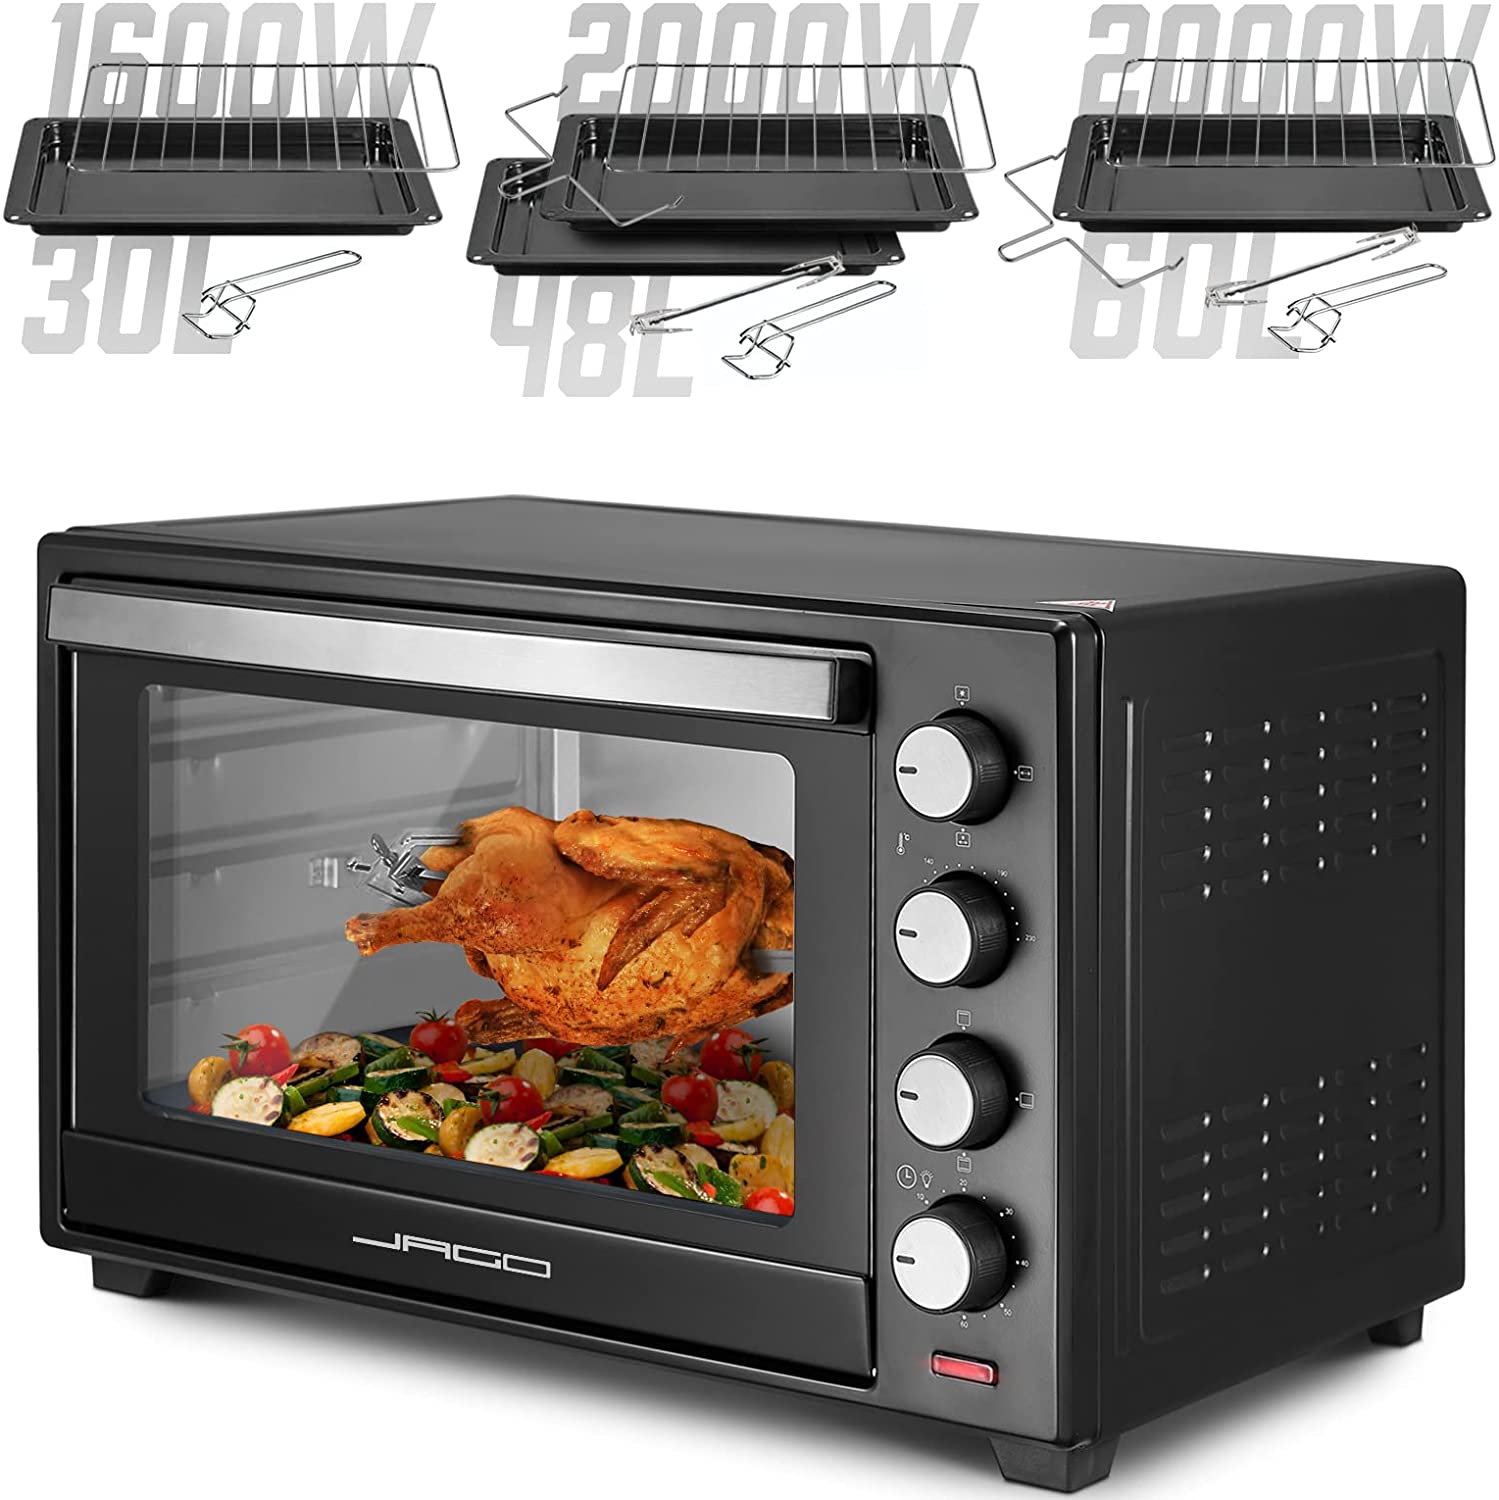 Jago® Mini Oven with Circulation - Model Selection, 100 to 230 °C, Timer (0-60 Min), with Wire Mesh, Baking Tray & Accessories, Black - Mini Oven, Mini Kitchen, Barbecue, Pizza Oven